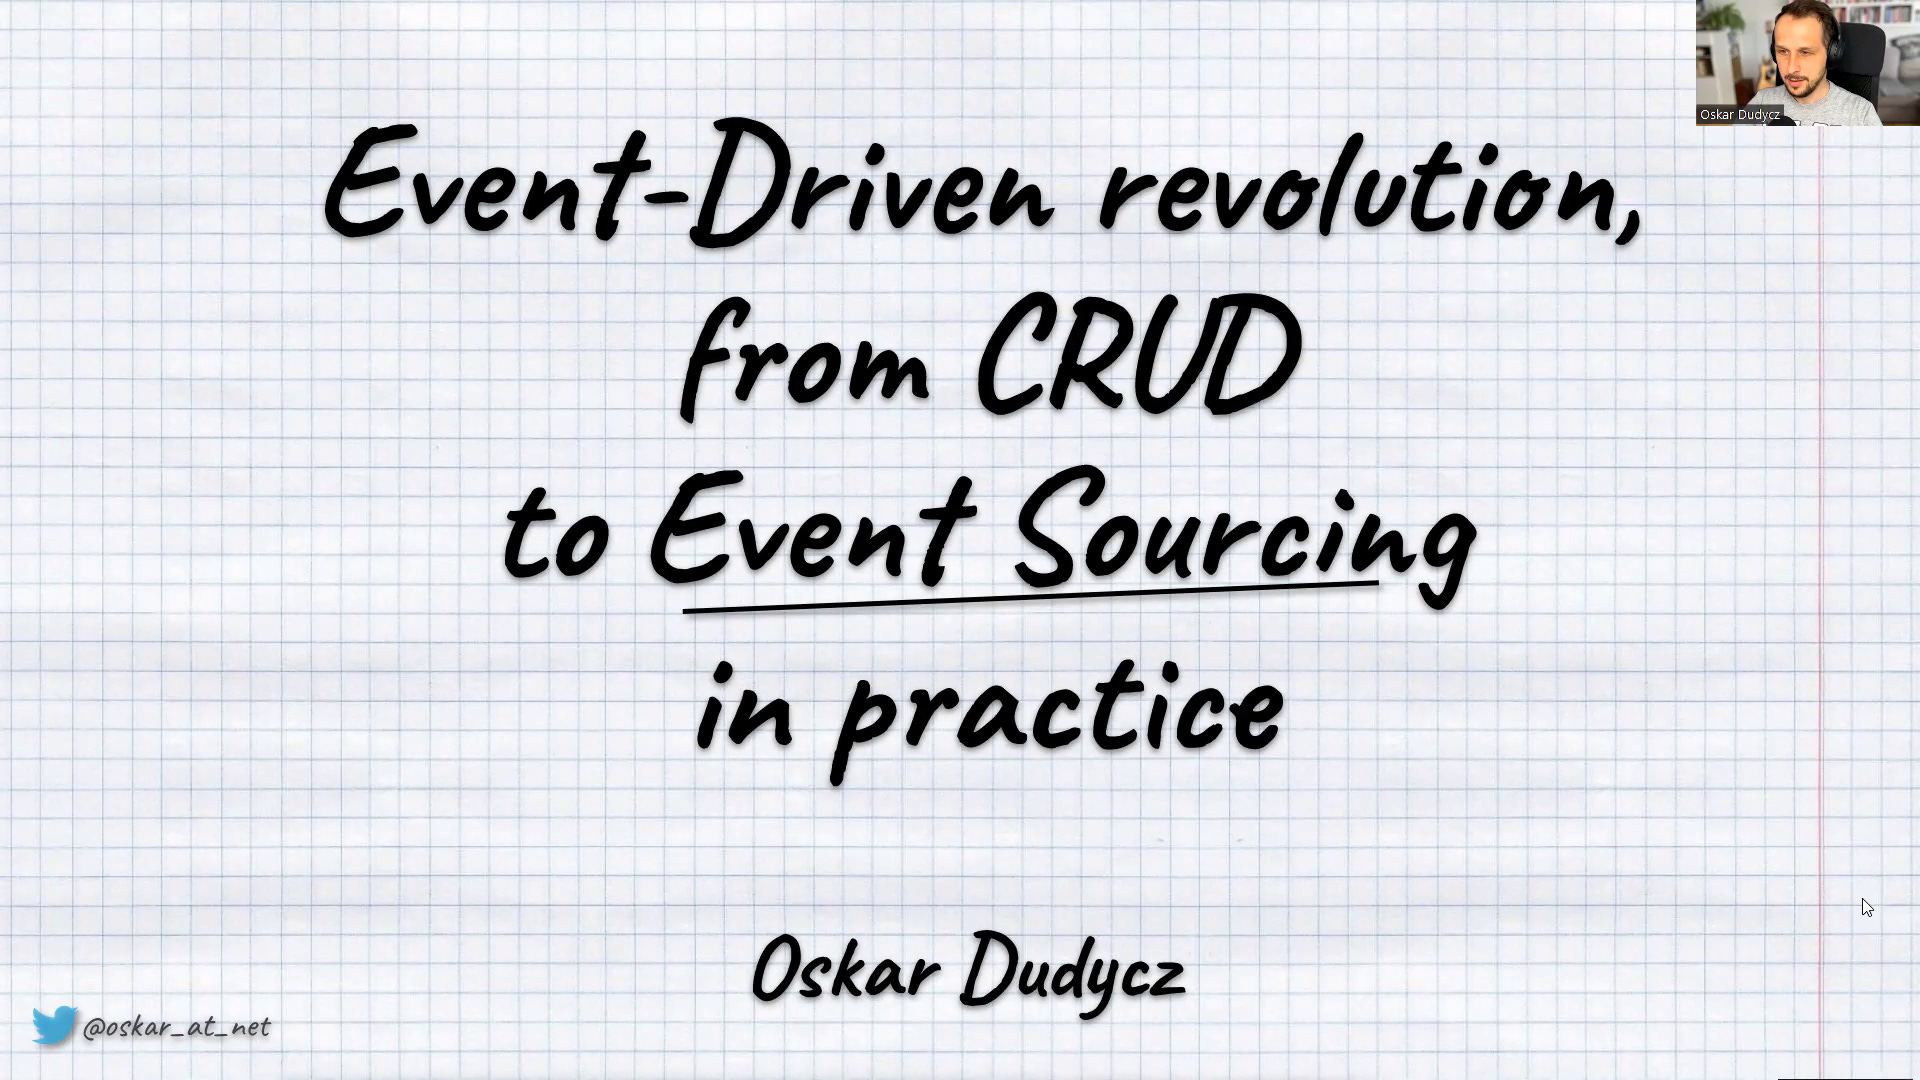 vent-Driven revolution, from CRUD to Event Sourcing